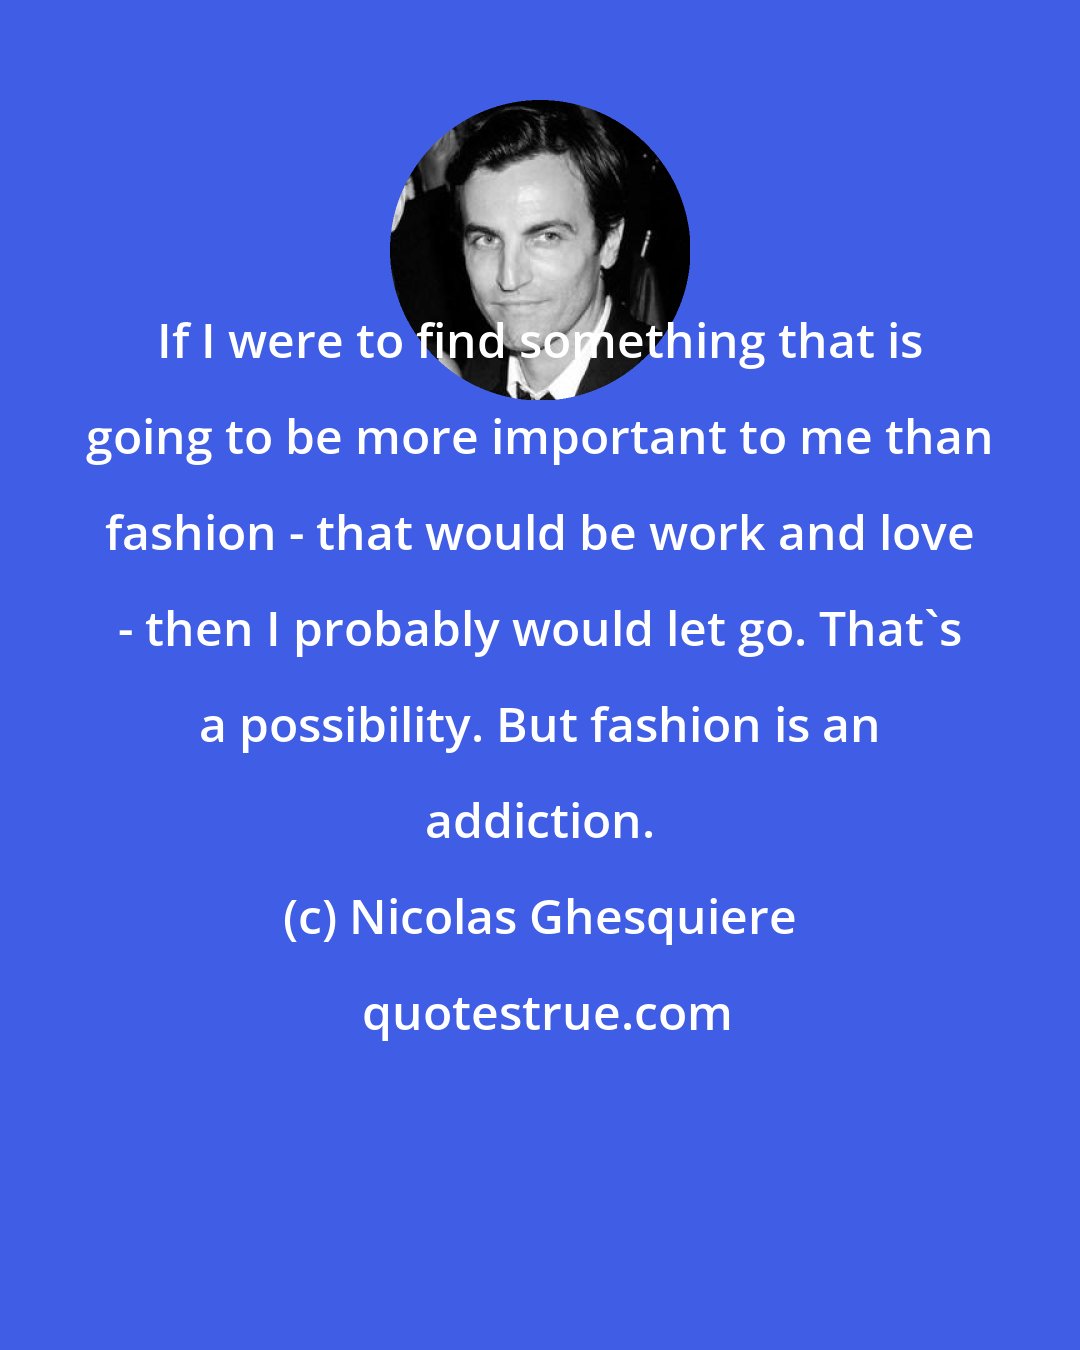 Nicolas Ghesquiere: If I were to find something that is going to be more important to me than fashion - that would be work and love - then I probably would let go. That's a possibility. But fashion is an addiction.